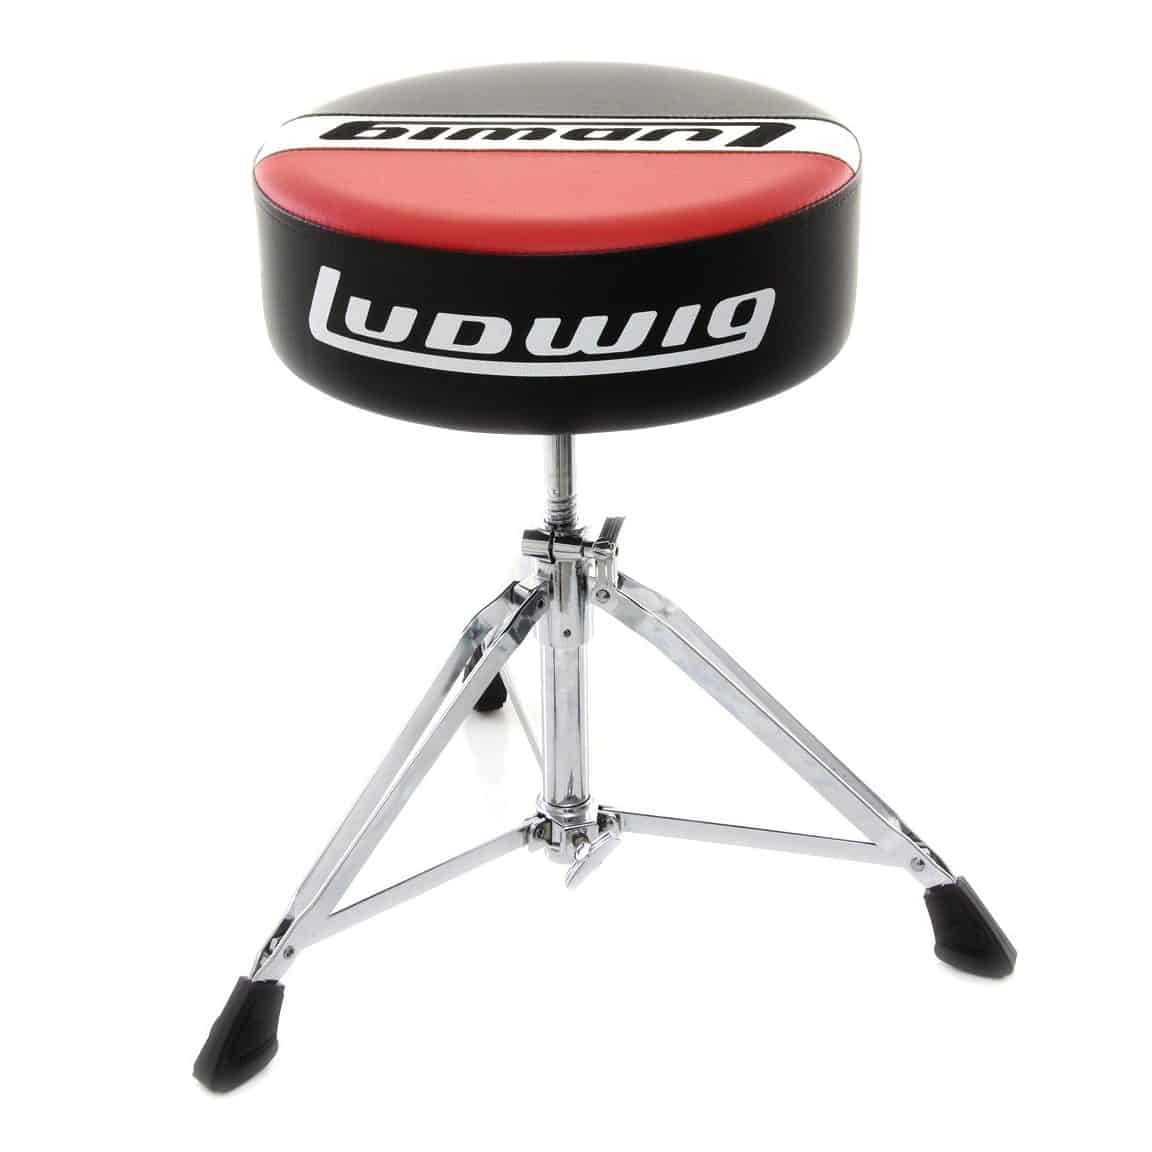 Ludwig classic throne round